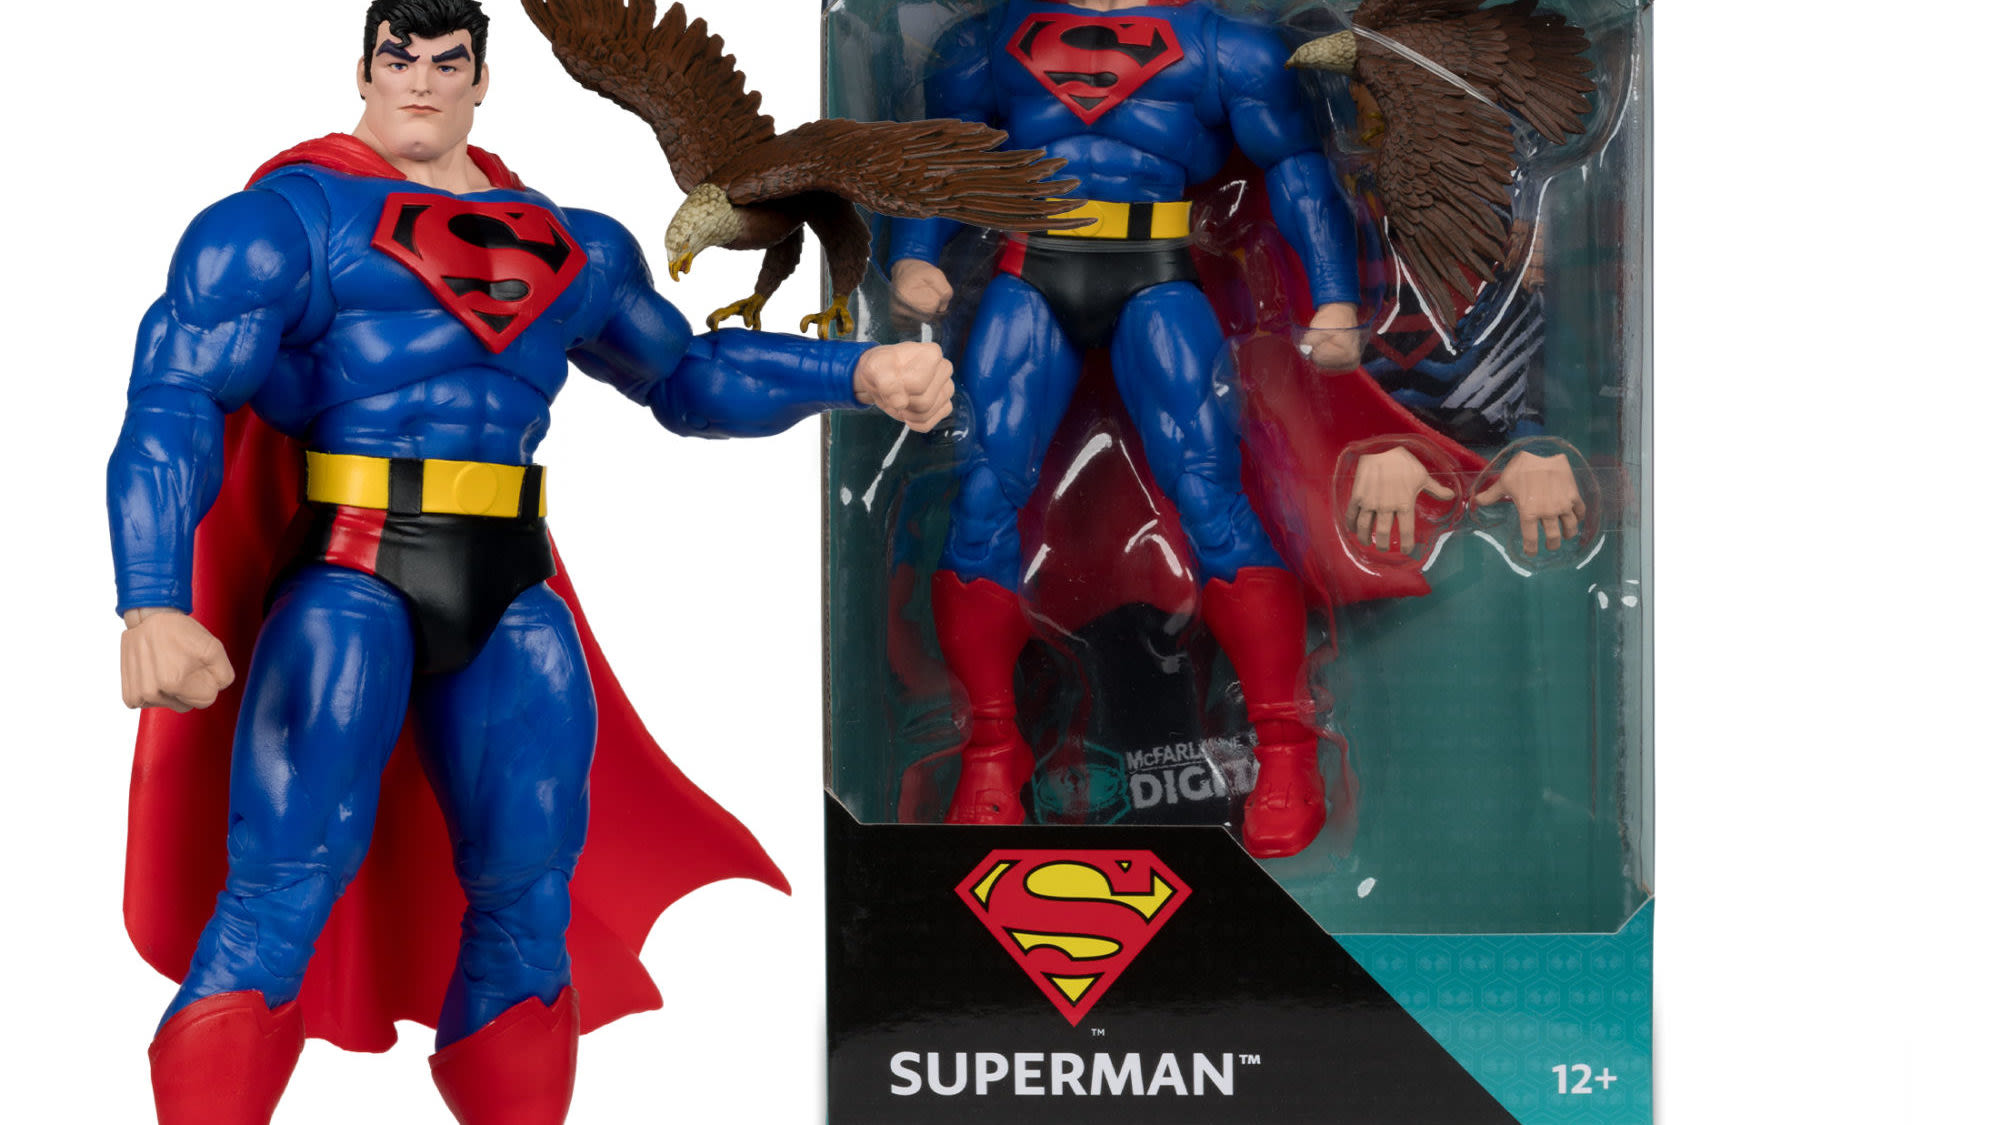 Superman Flies On Into McFarlane Toys with New DC Multiverse Figure